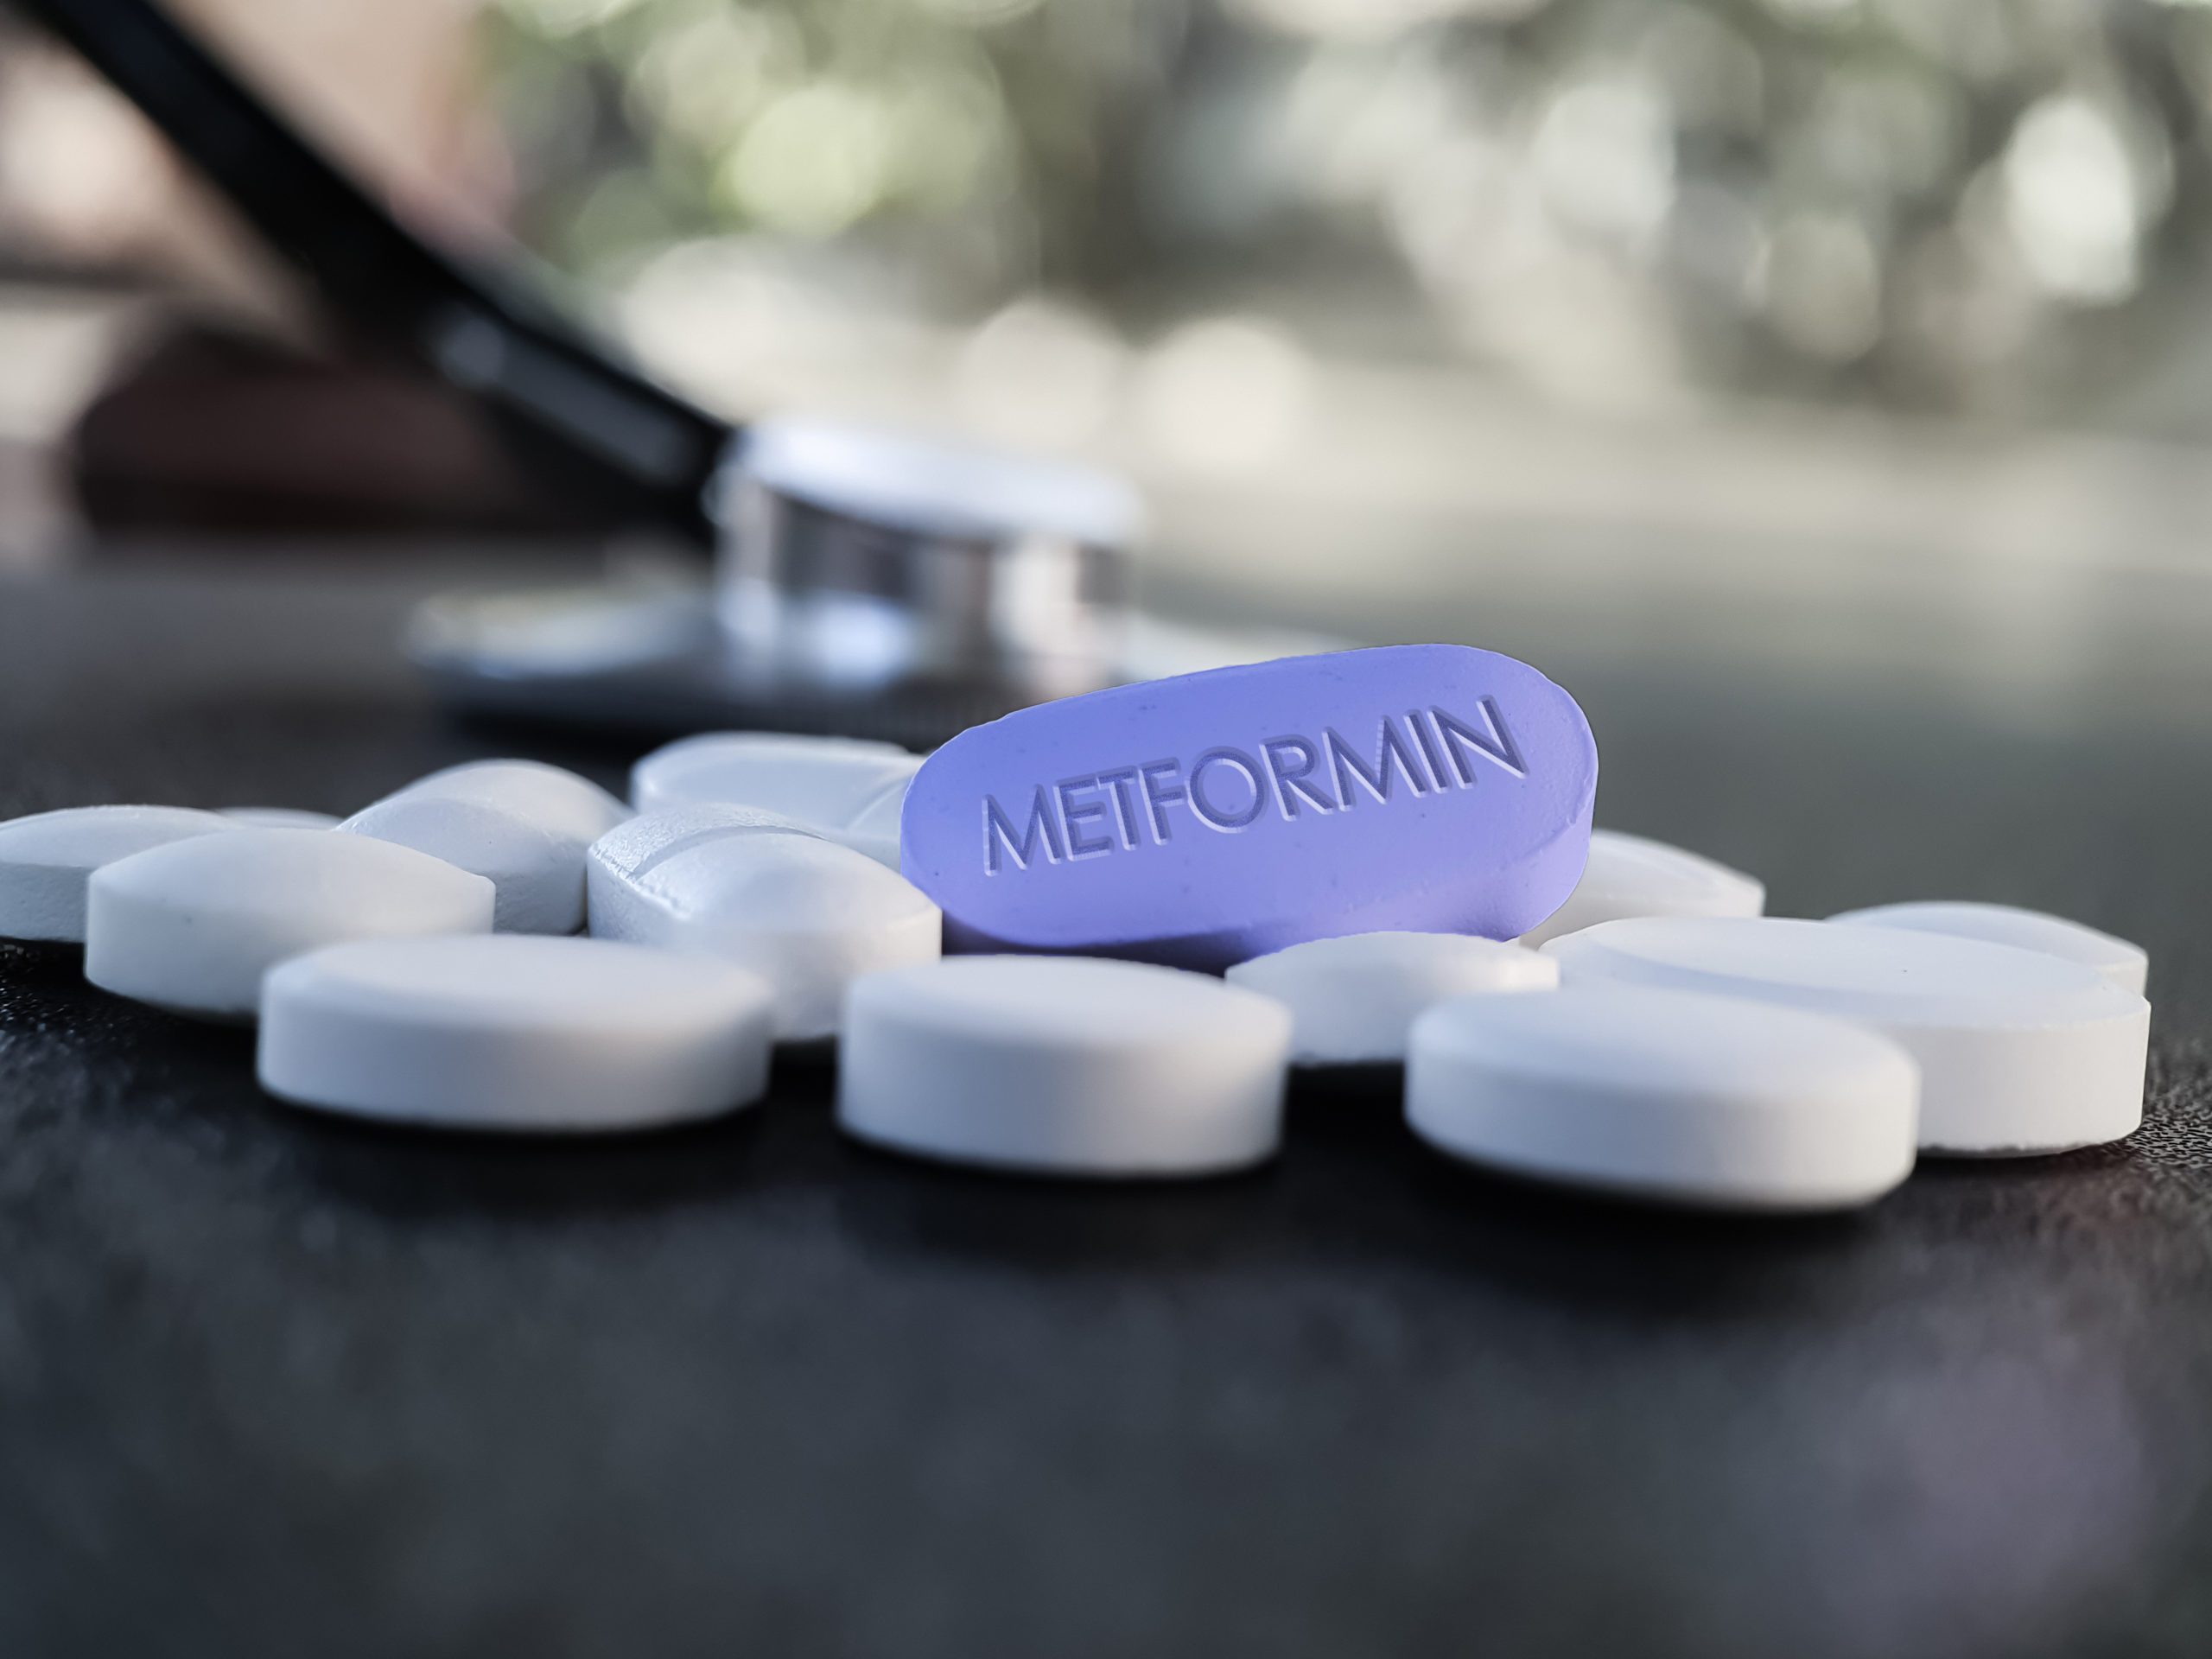 A blue Metformin pill surrounded by white pills